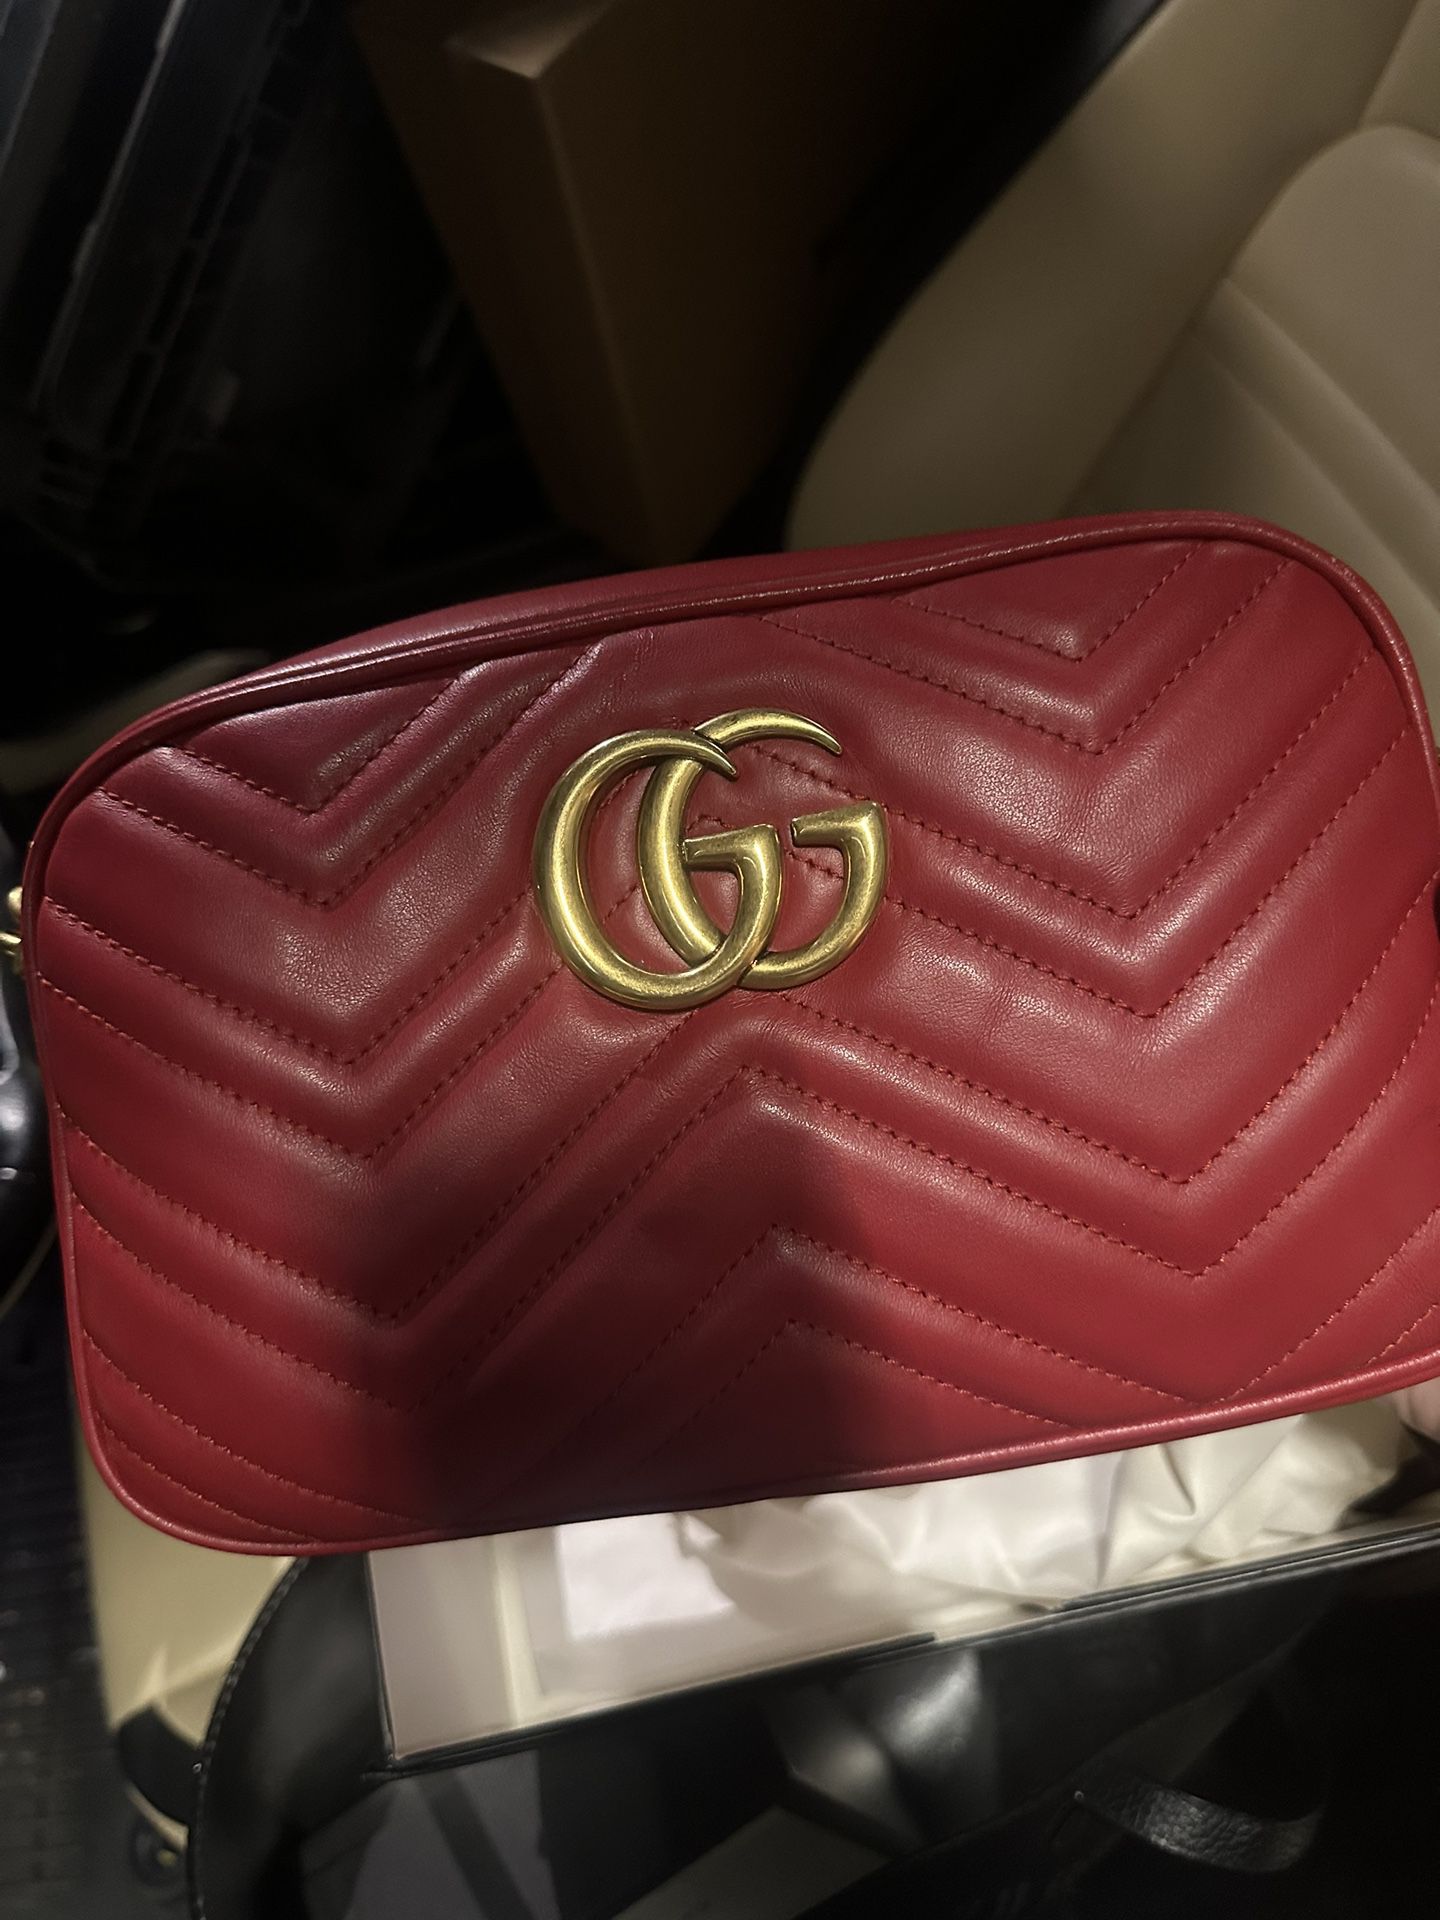 Red Gucci marmont Bag Size Small 